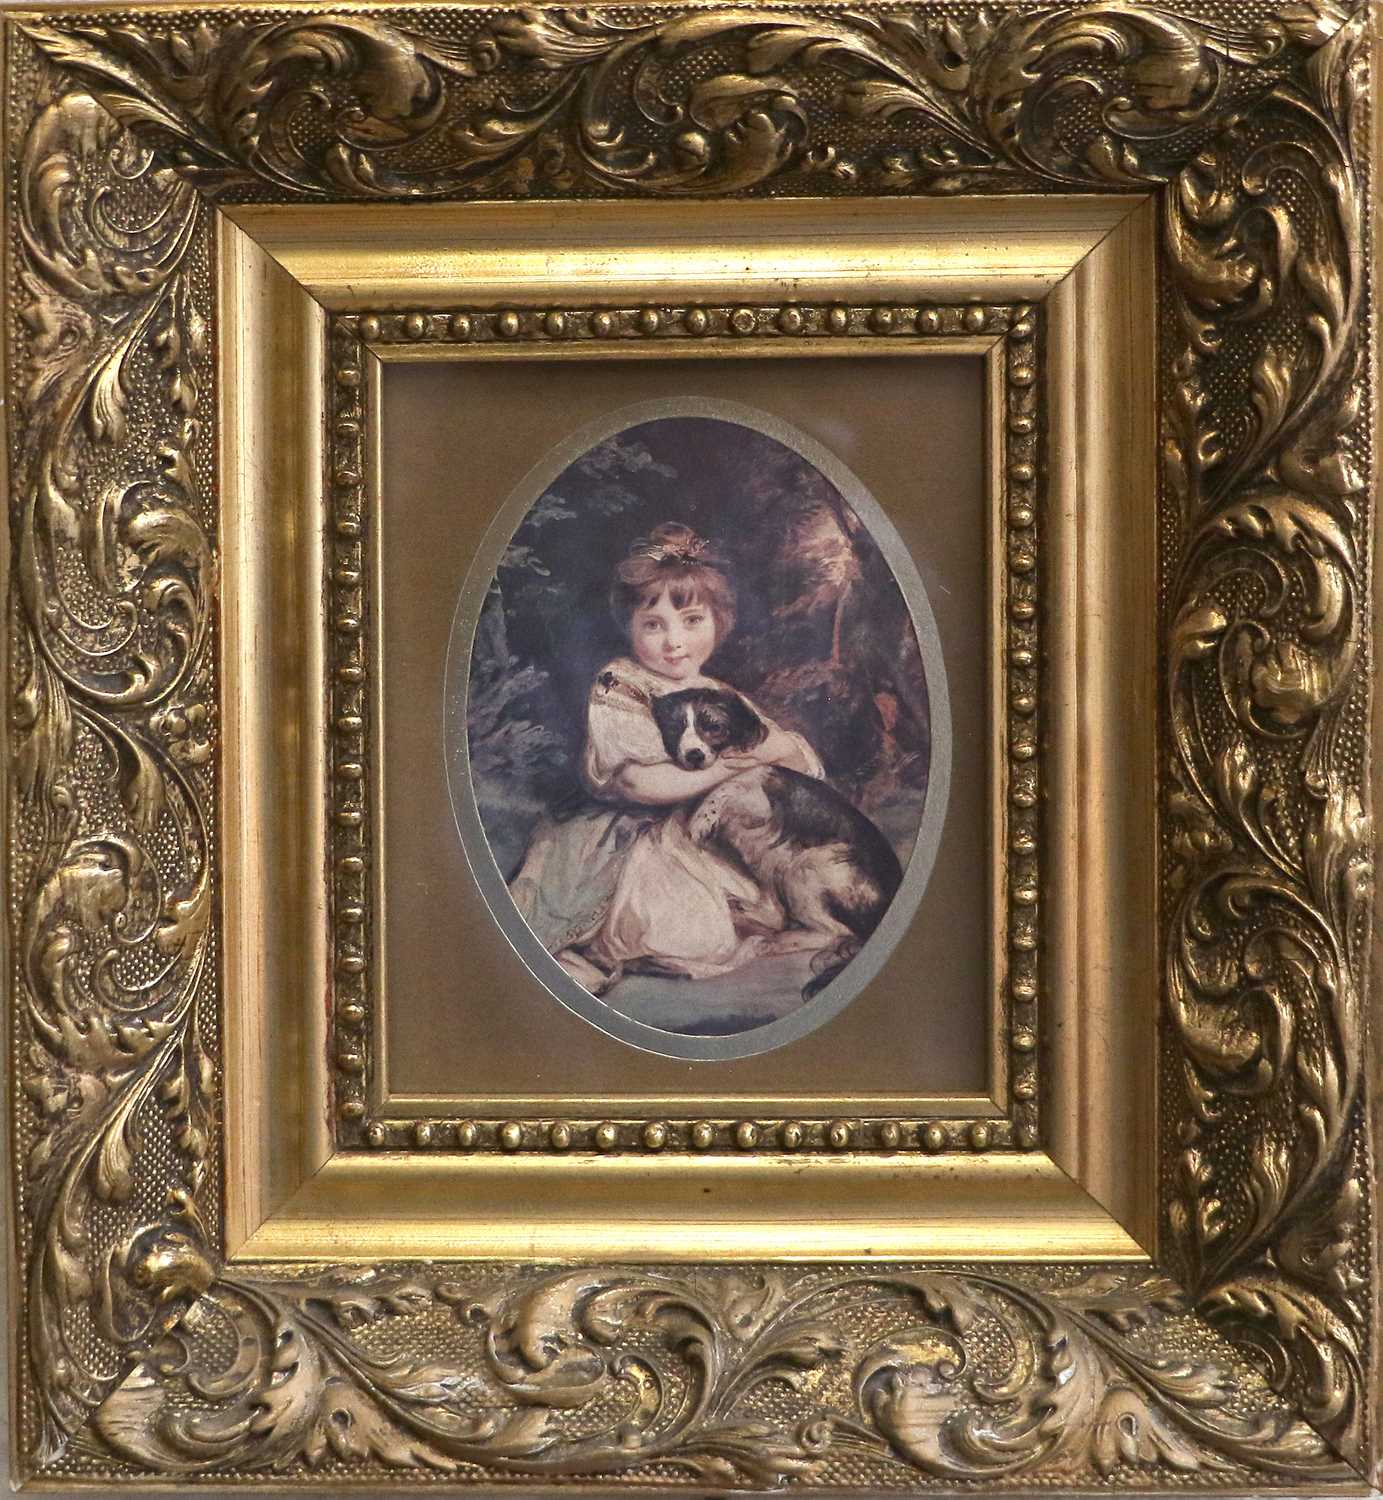 A Modern Reproduction After an Italian Original, together with a pair of small portrait prints of - Image 6 of 12